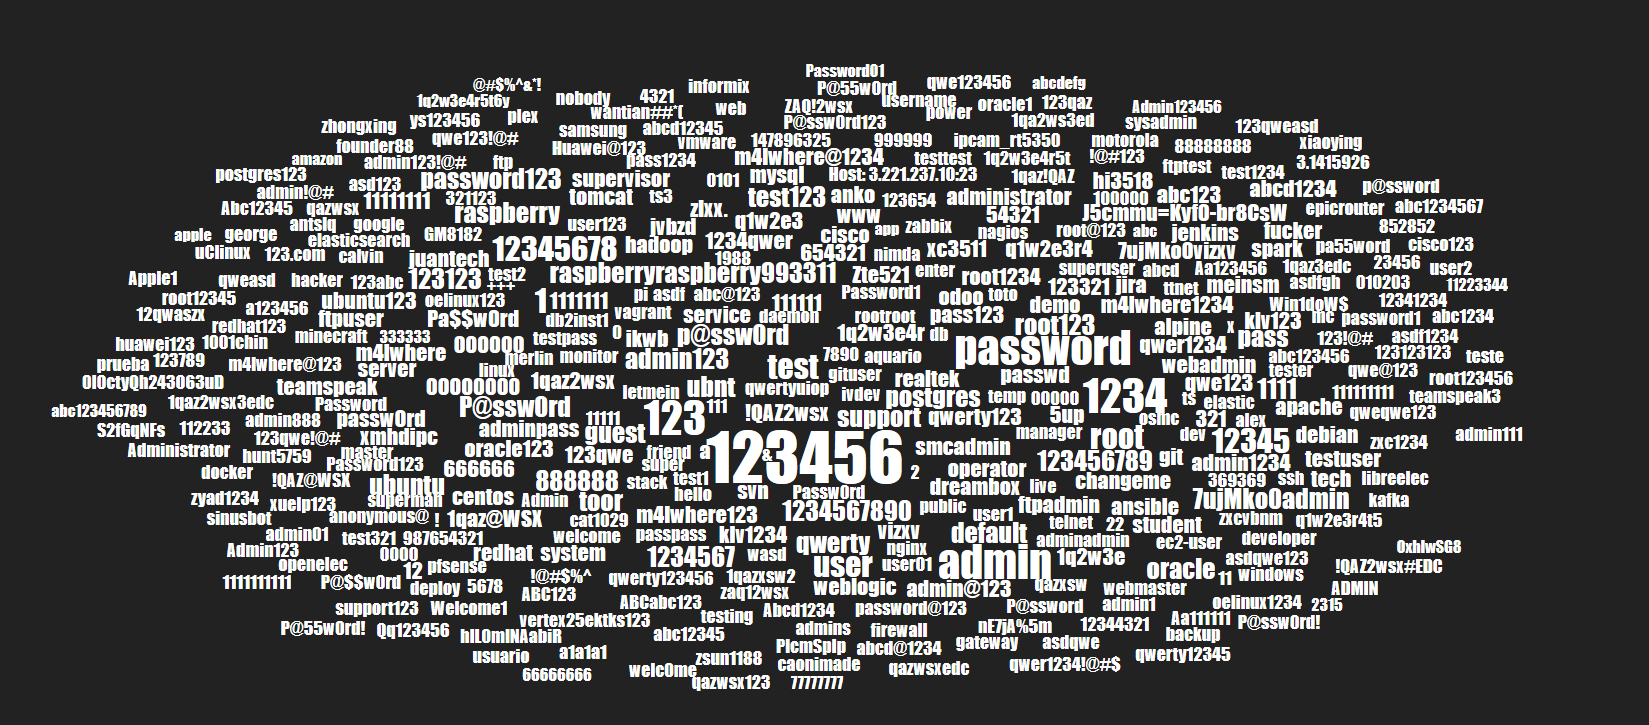 Passwords attempted by attackers